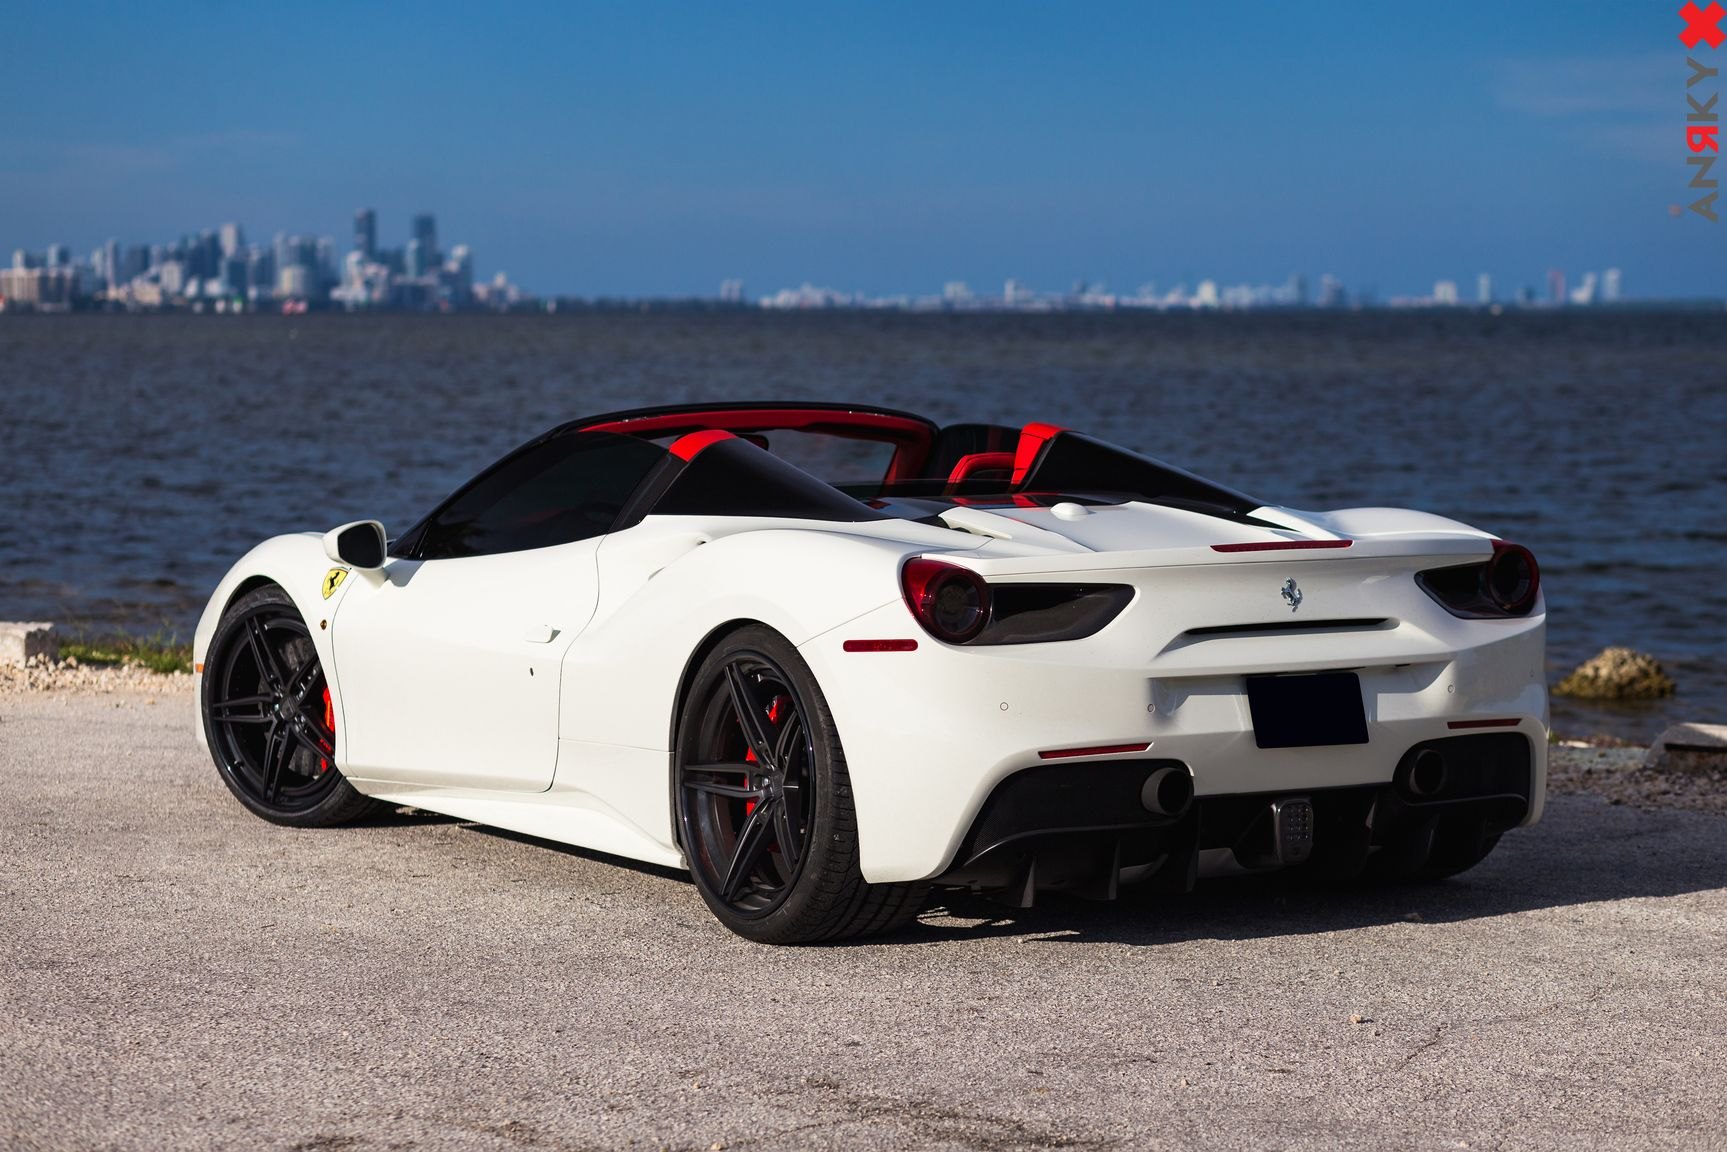 Aftermarket Rear Diffuser on White Convertible Ferrari 488 - Photo by Anrky Wheels